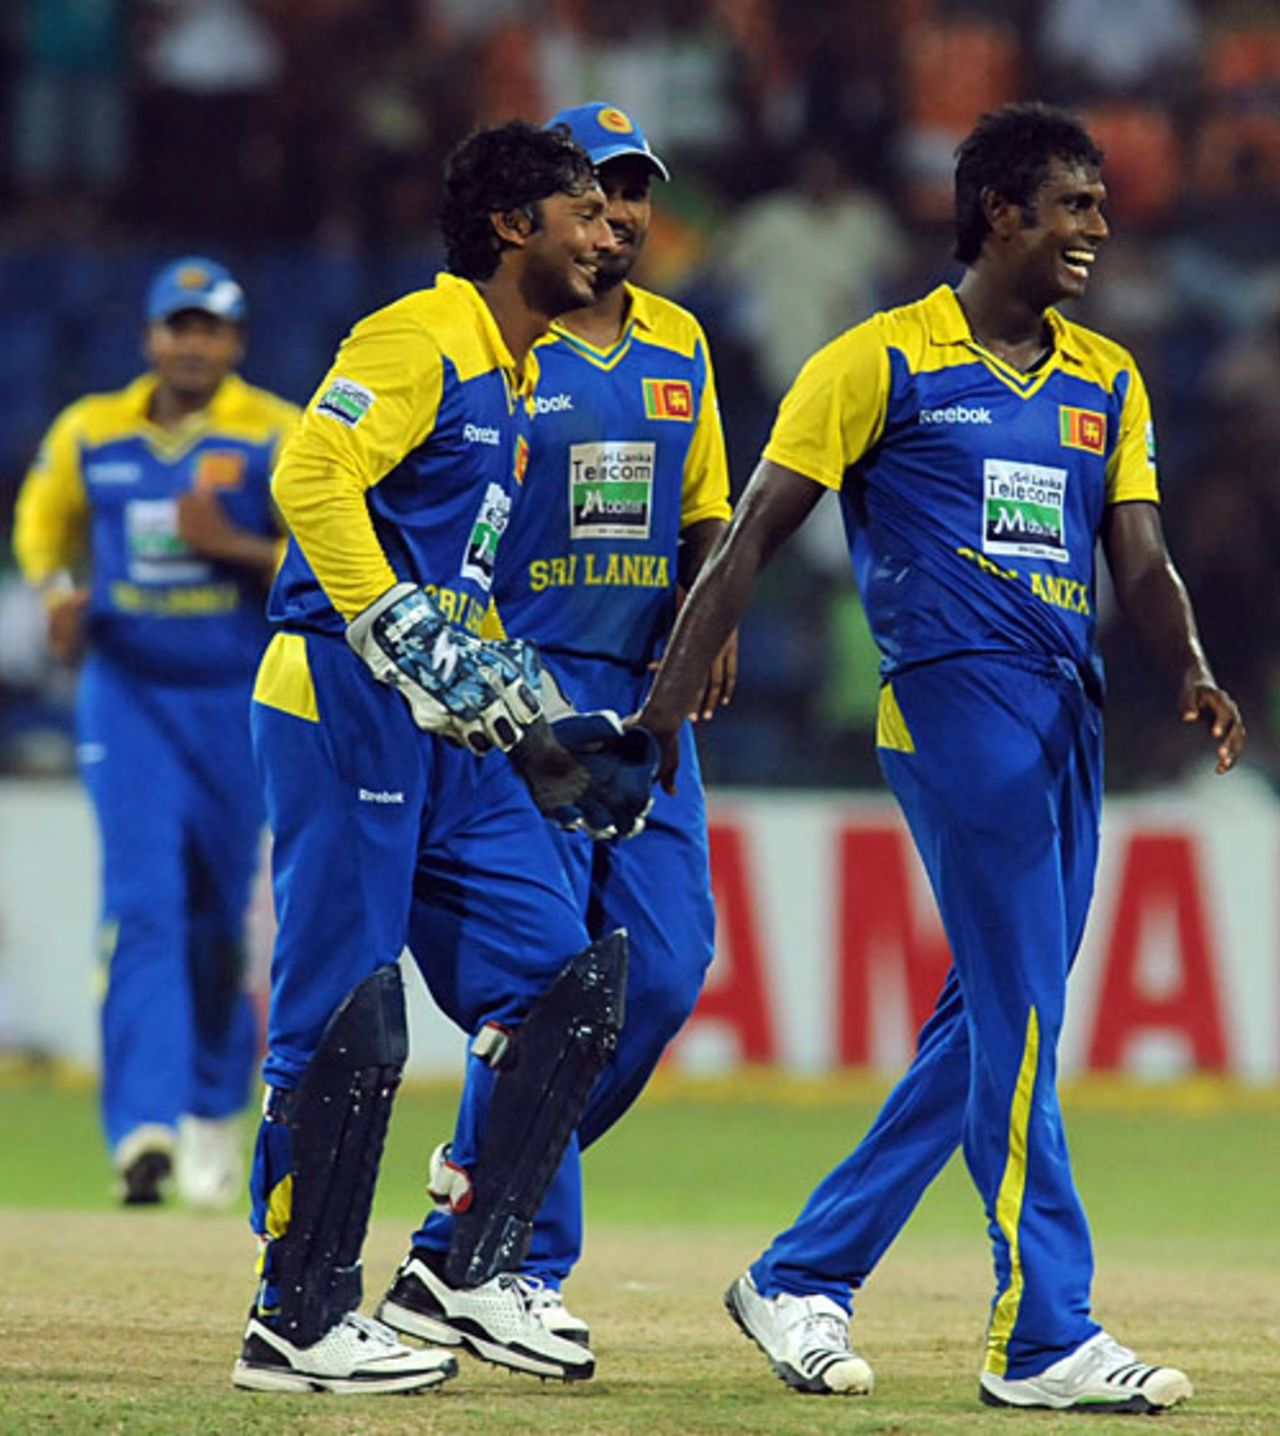 Angelo Mathews is congratulated by team-mates for his 6 for 20, Sri Lanka v India, Compaq Cup, 3rd match, Colombo, September 12, 2009